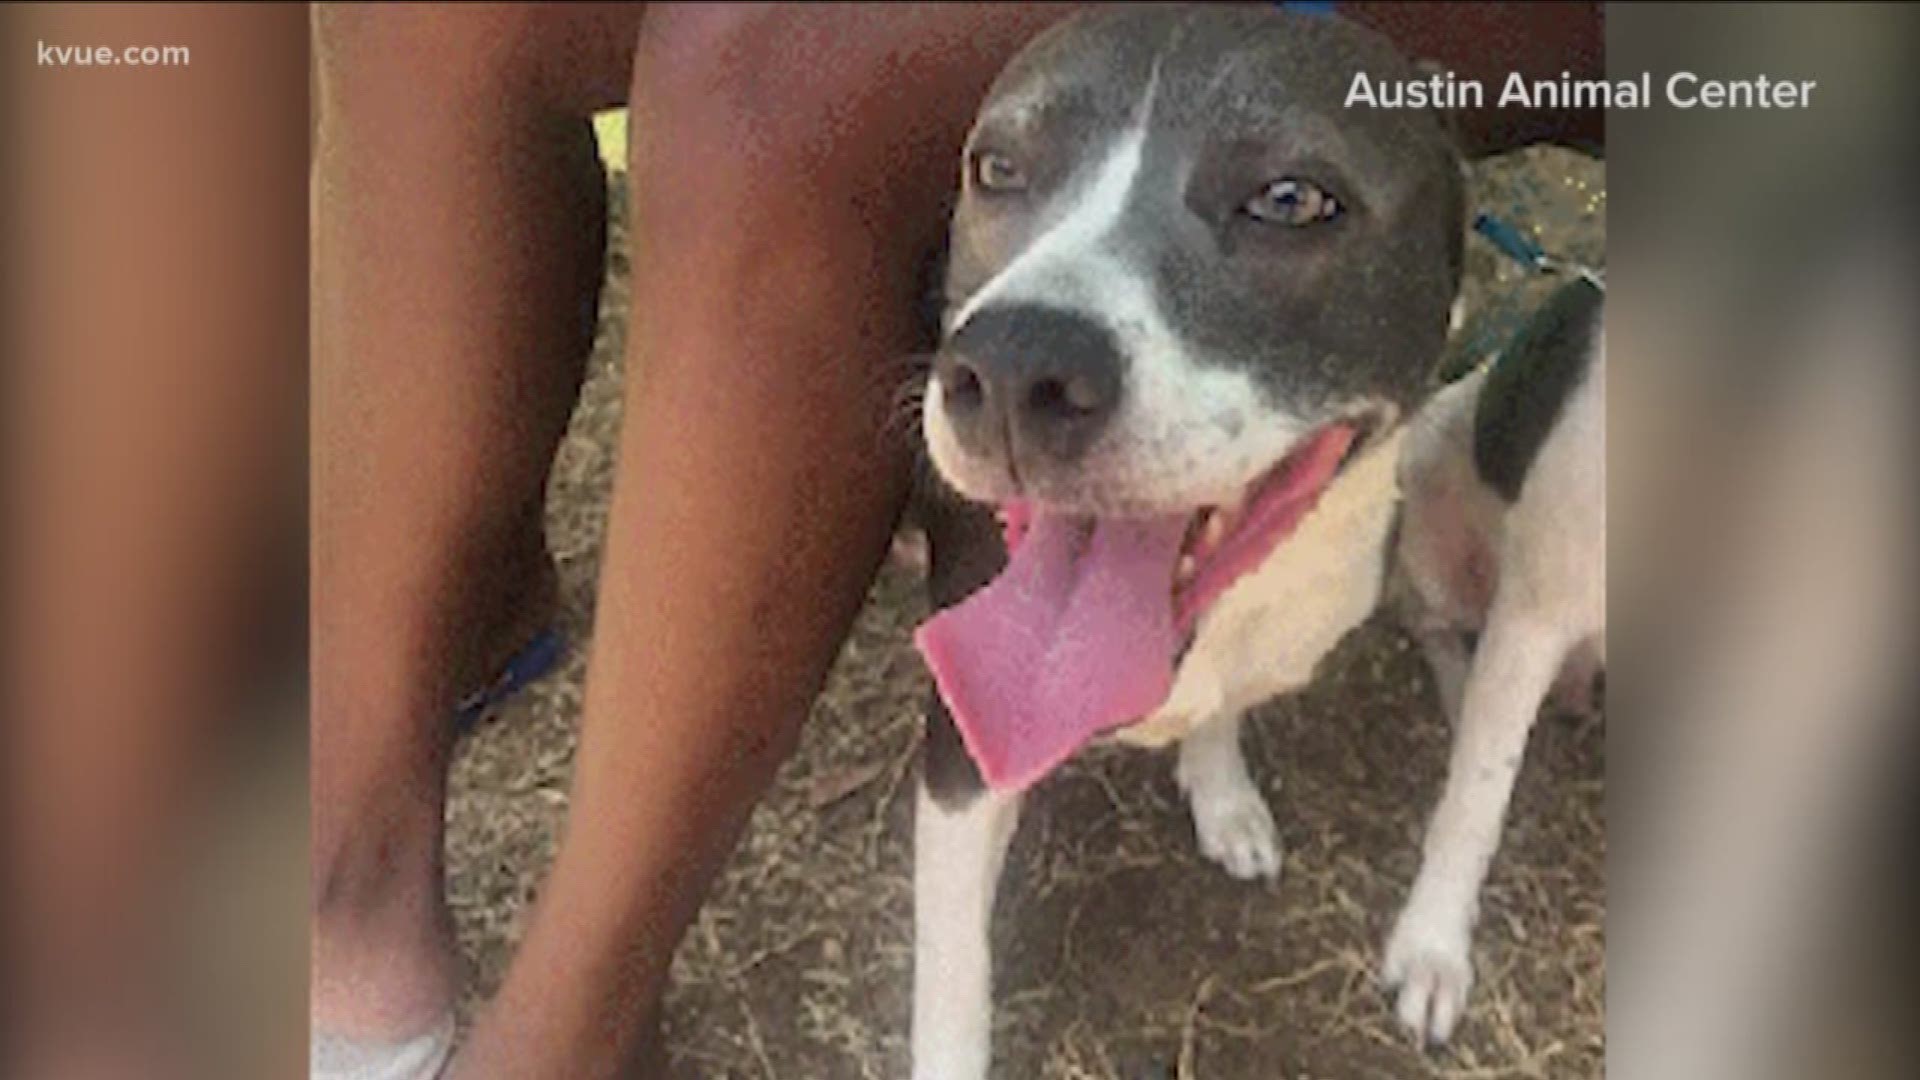 Animal advocates have been pressuring the City to reopen the hiring process for chief animal services officer. Now that push is even greater after a human error resulted in the deaths of unborn
puppies a the Austin Animal Center.